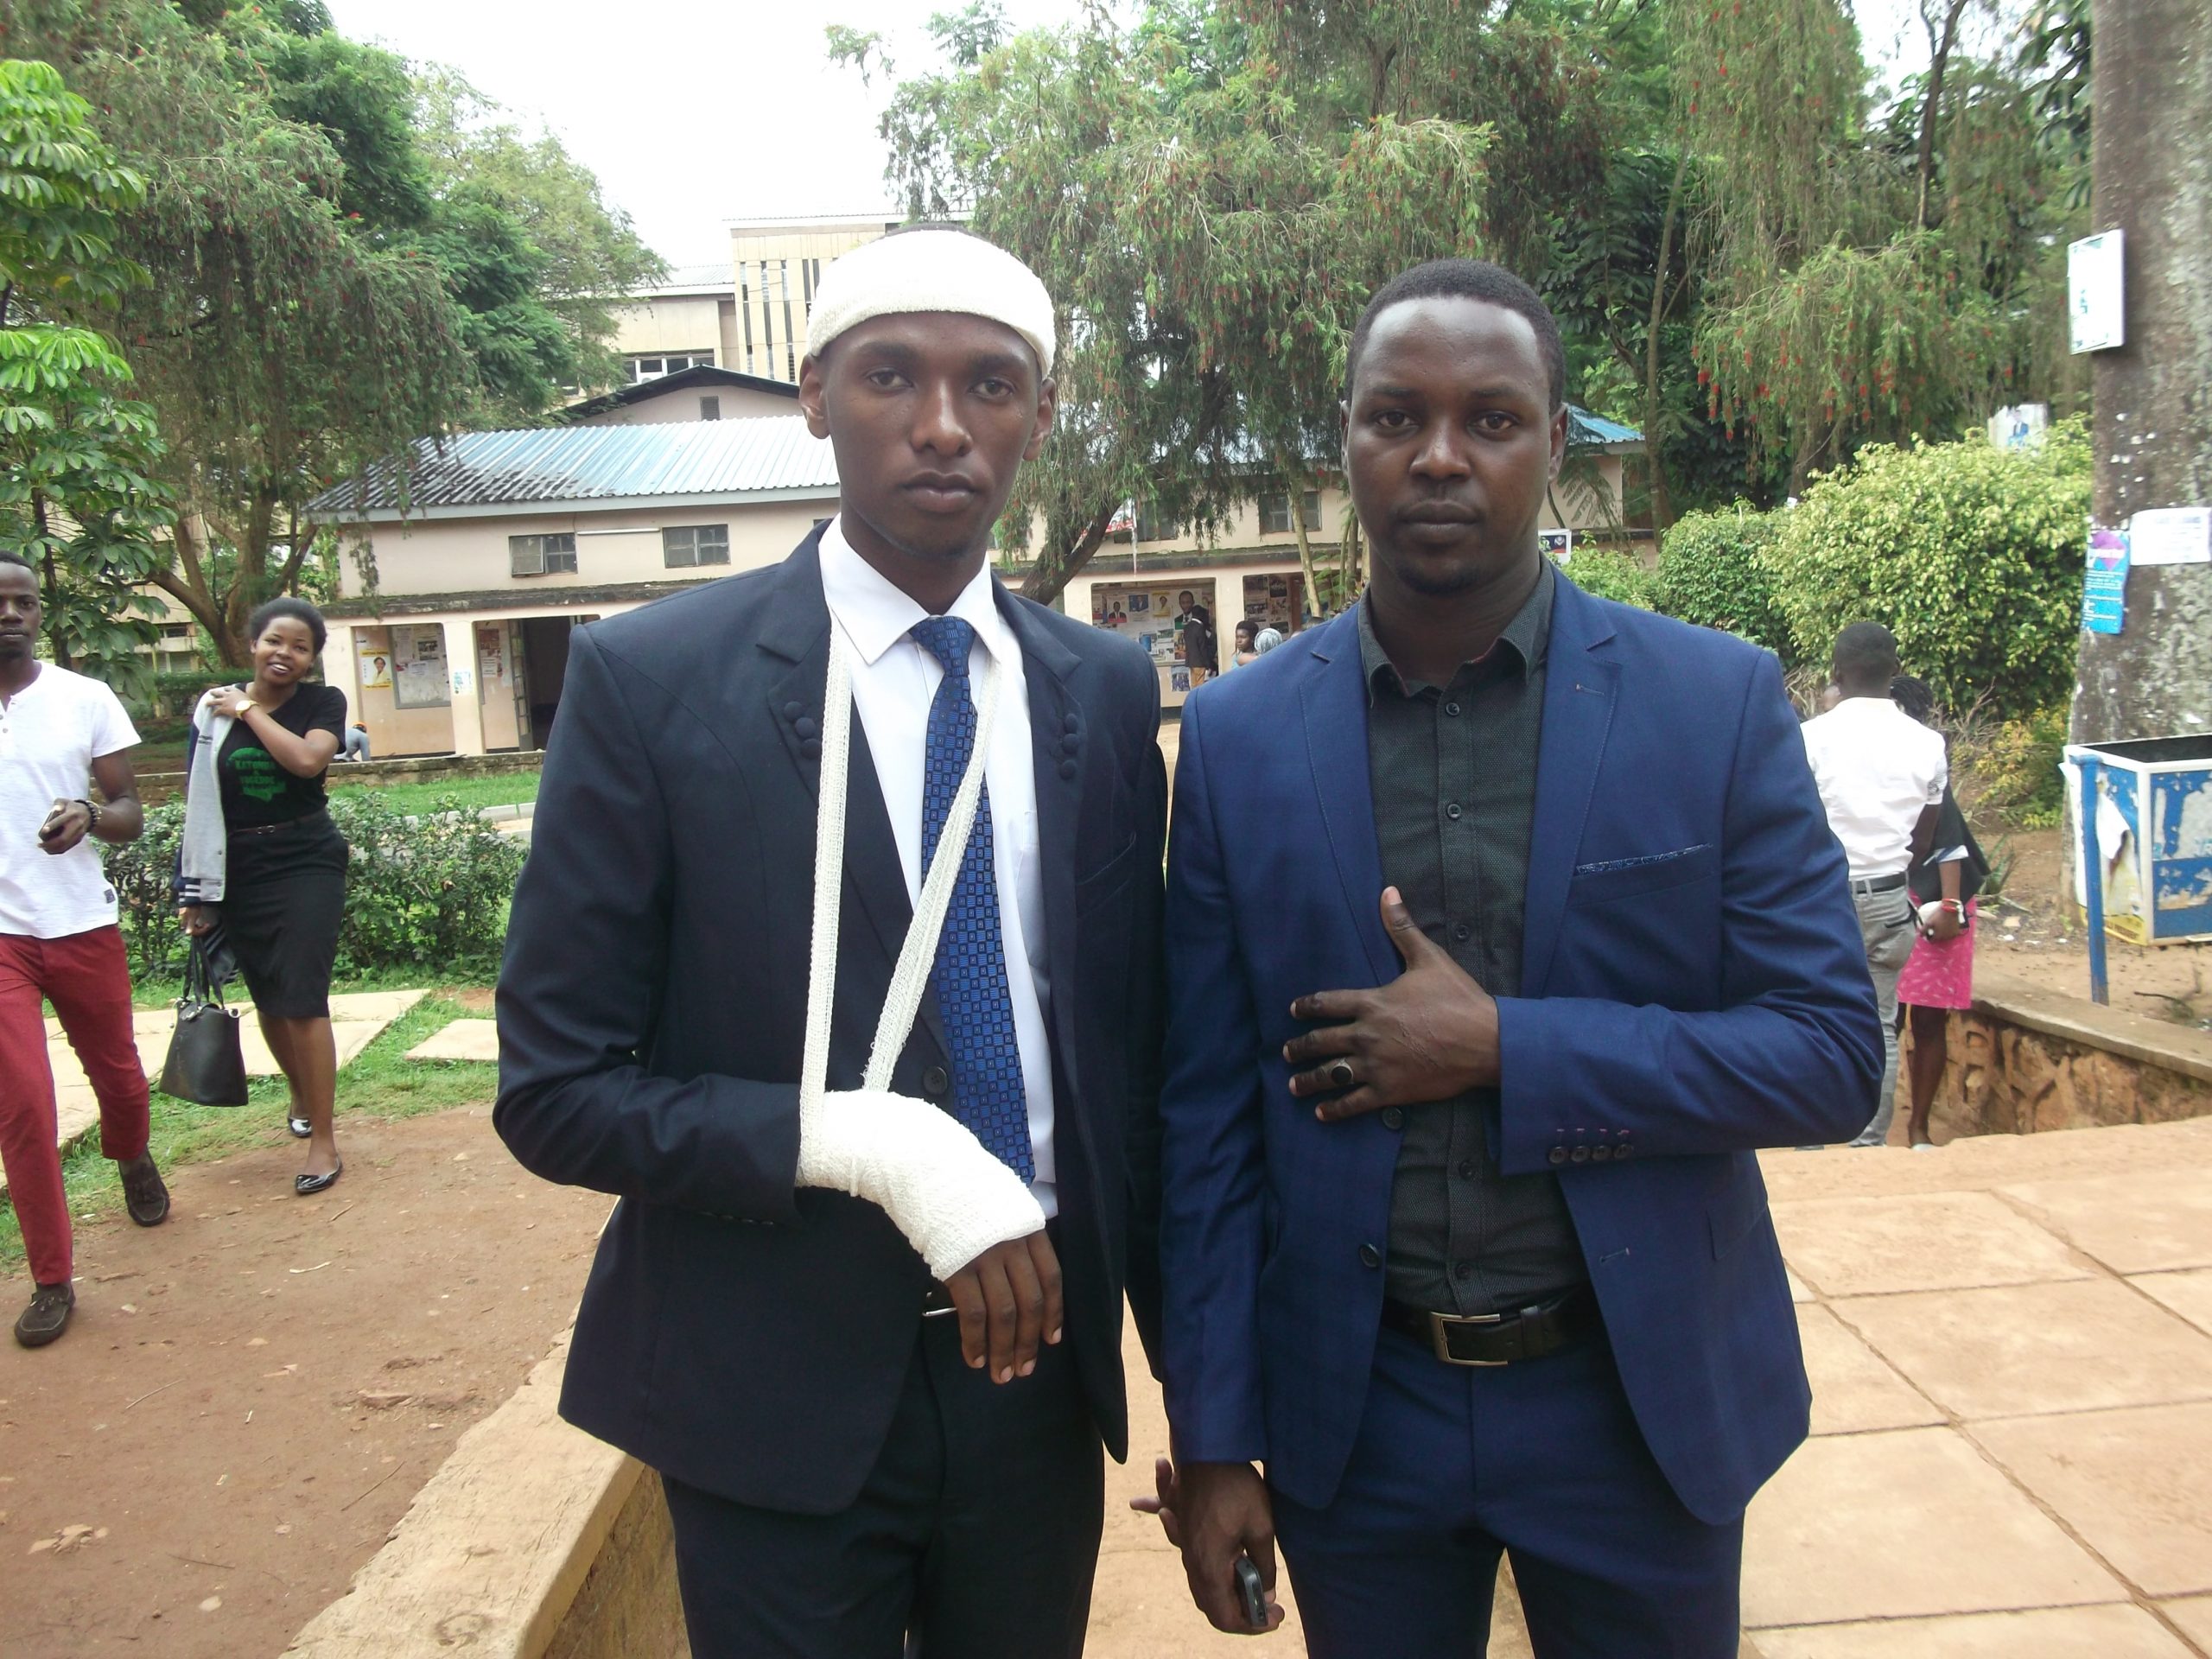 Kakuru with his campaign manager Henry during an interview with Campus Bee